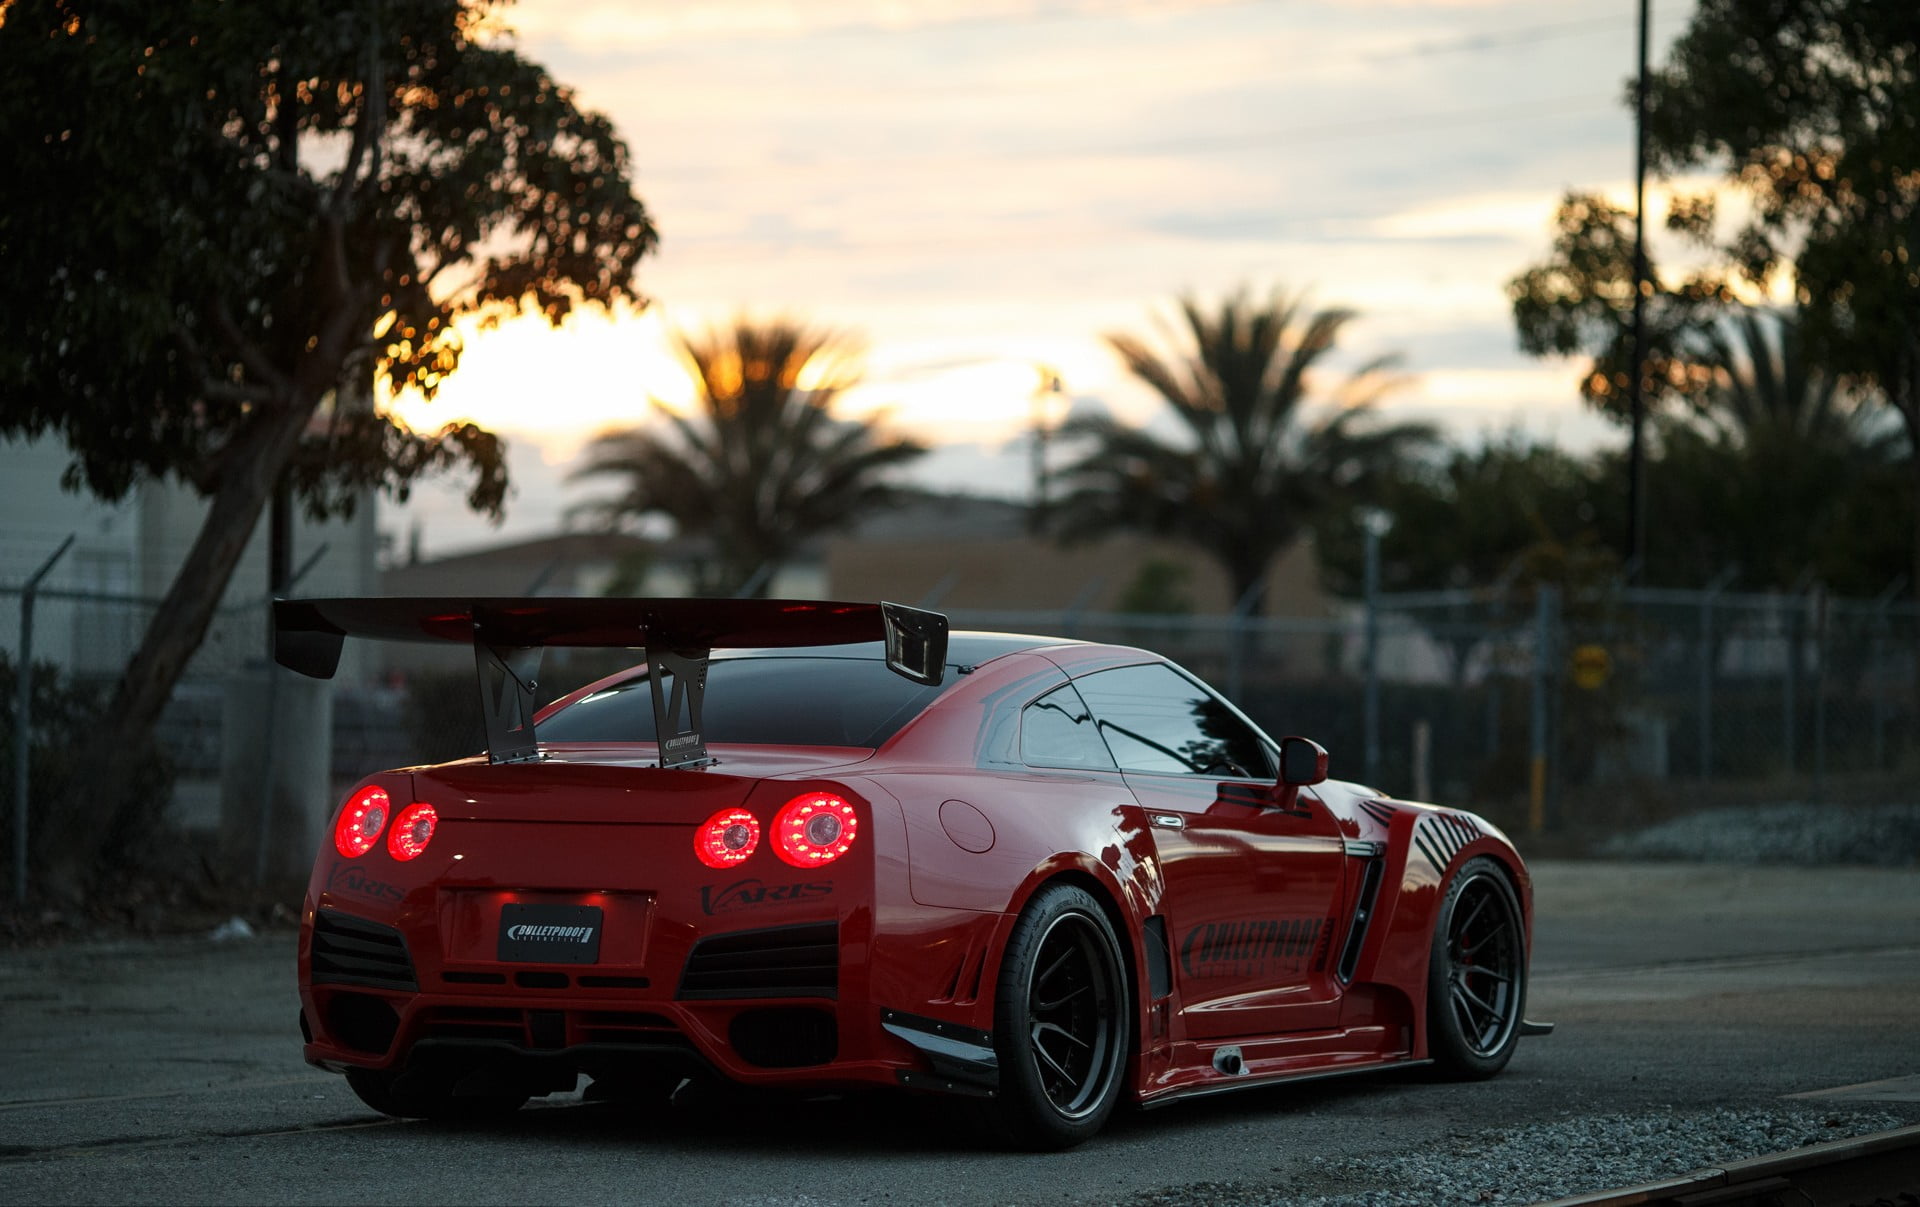 red sports car, Nissan, race cars, road, Nissan GT-R, red cars